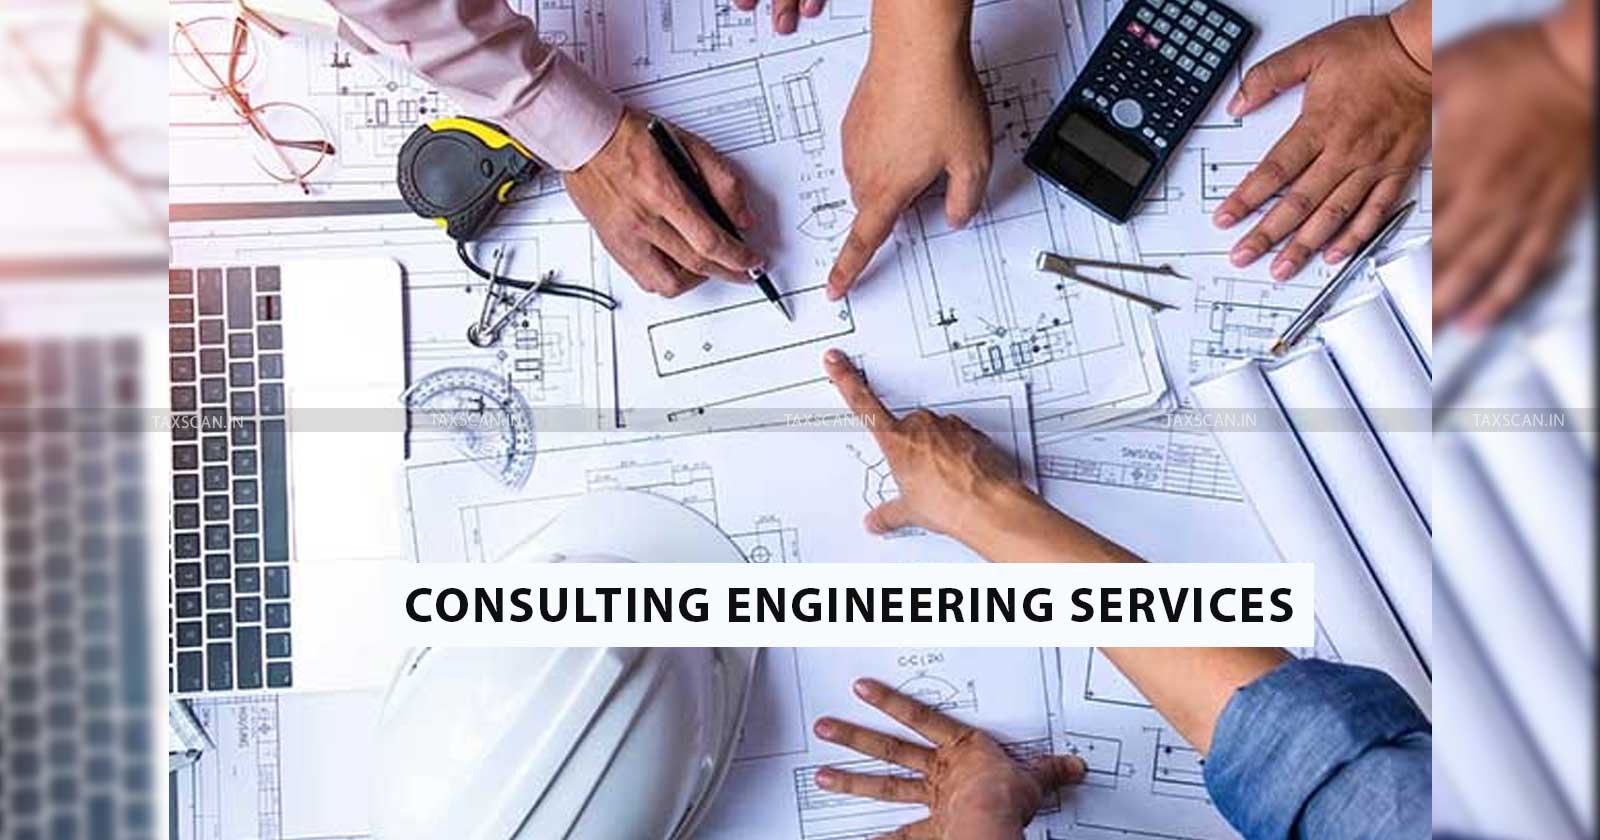 Service Tax Leviable - professional fees-Engineering charges -Consulting Engineering Services-CESTAT-TAXSCAN